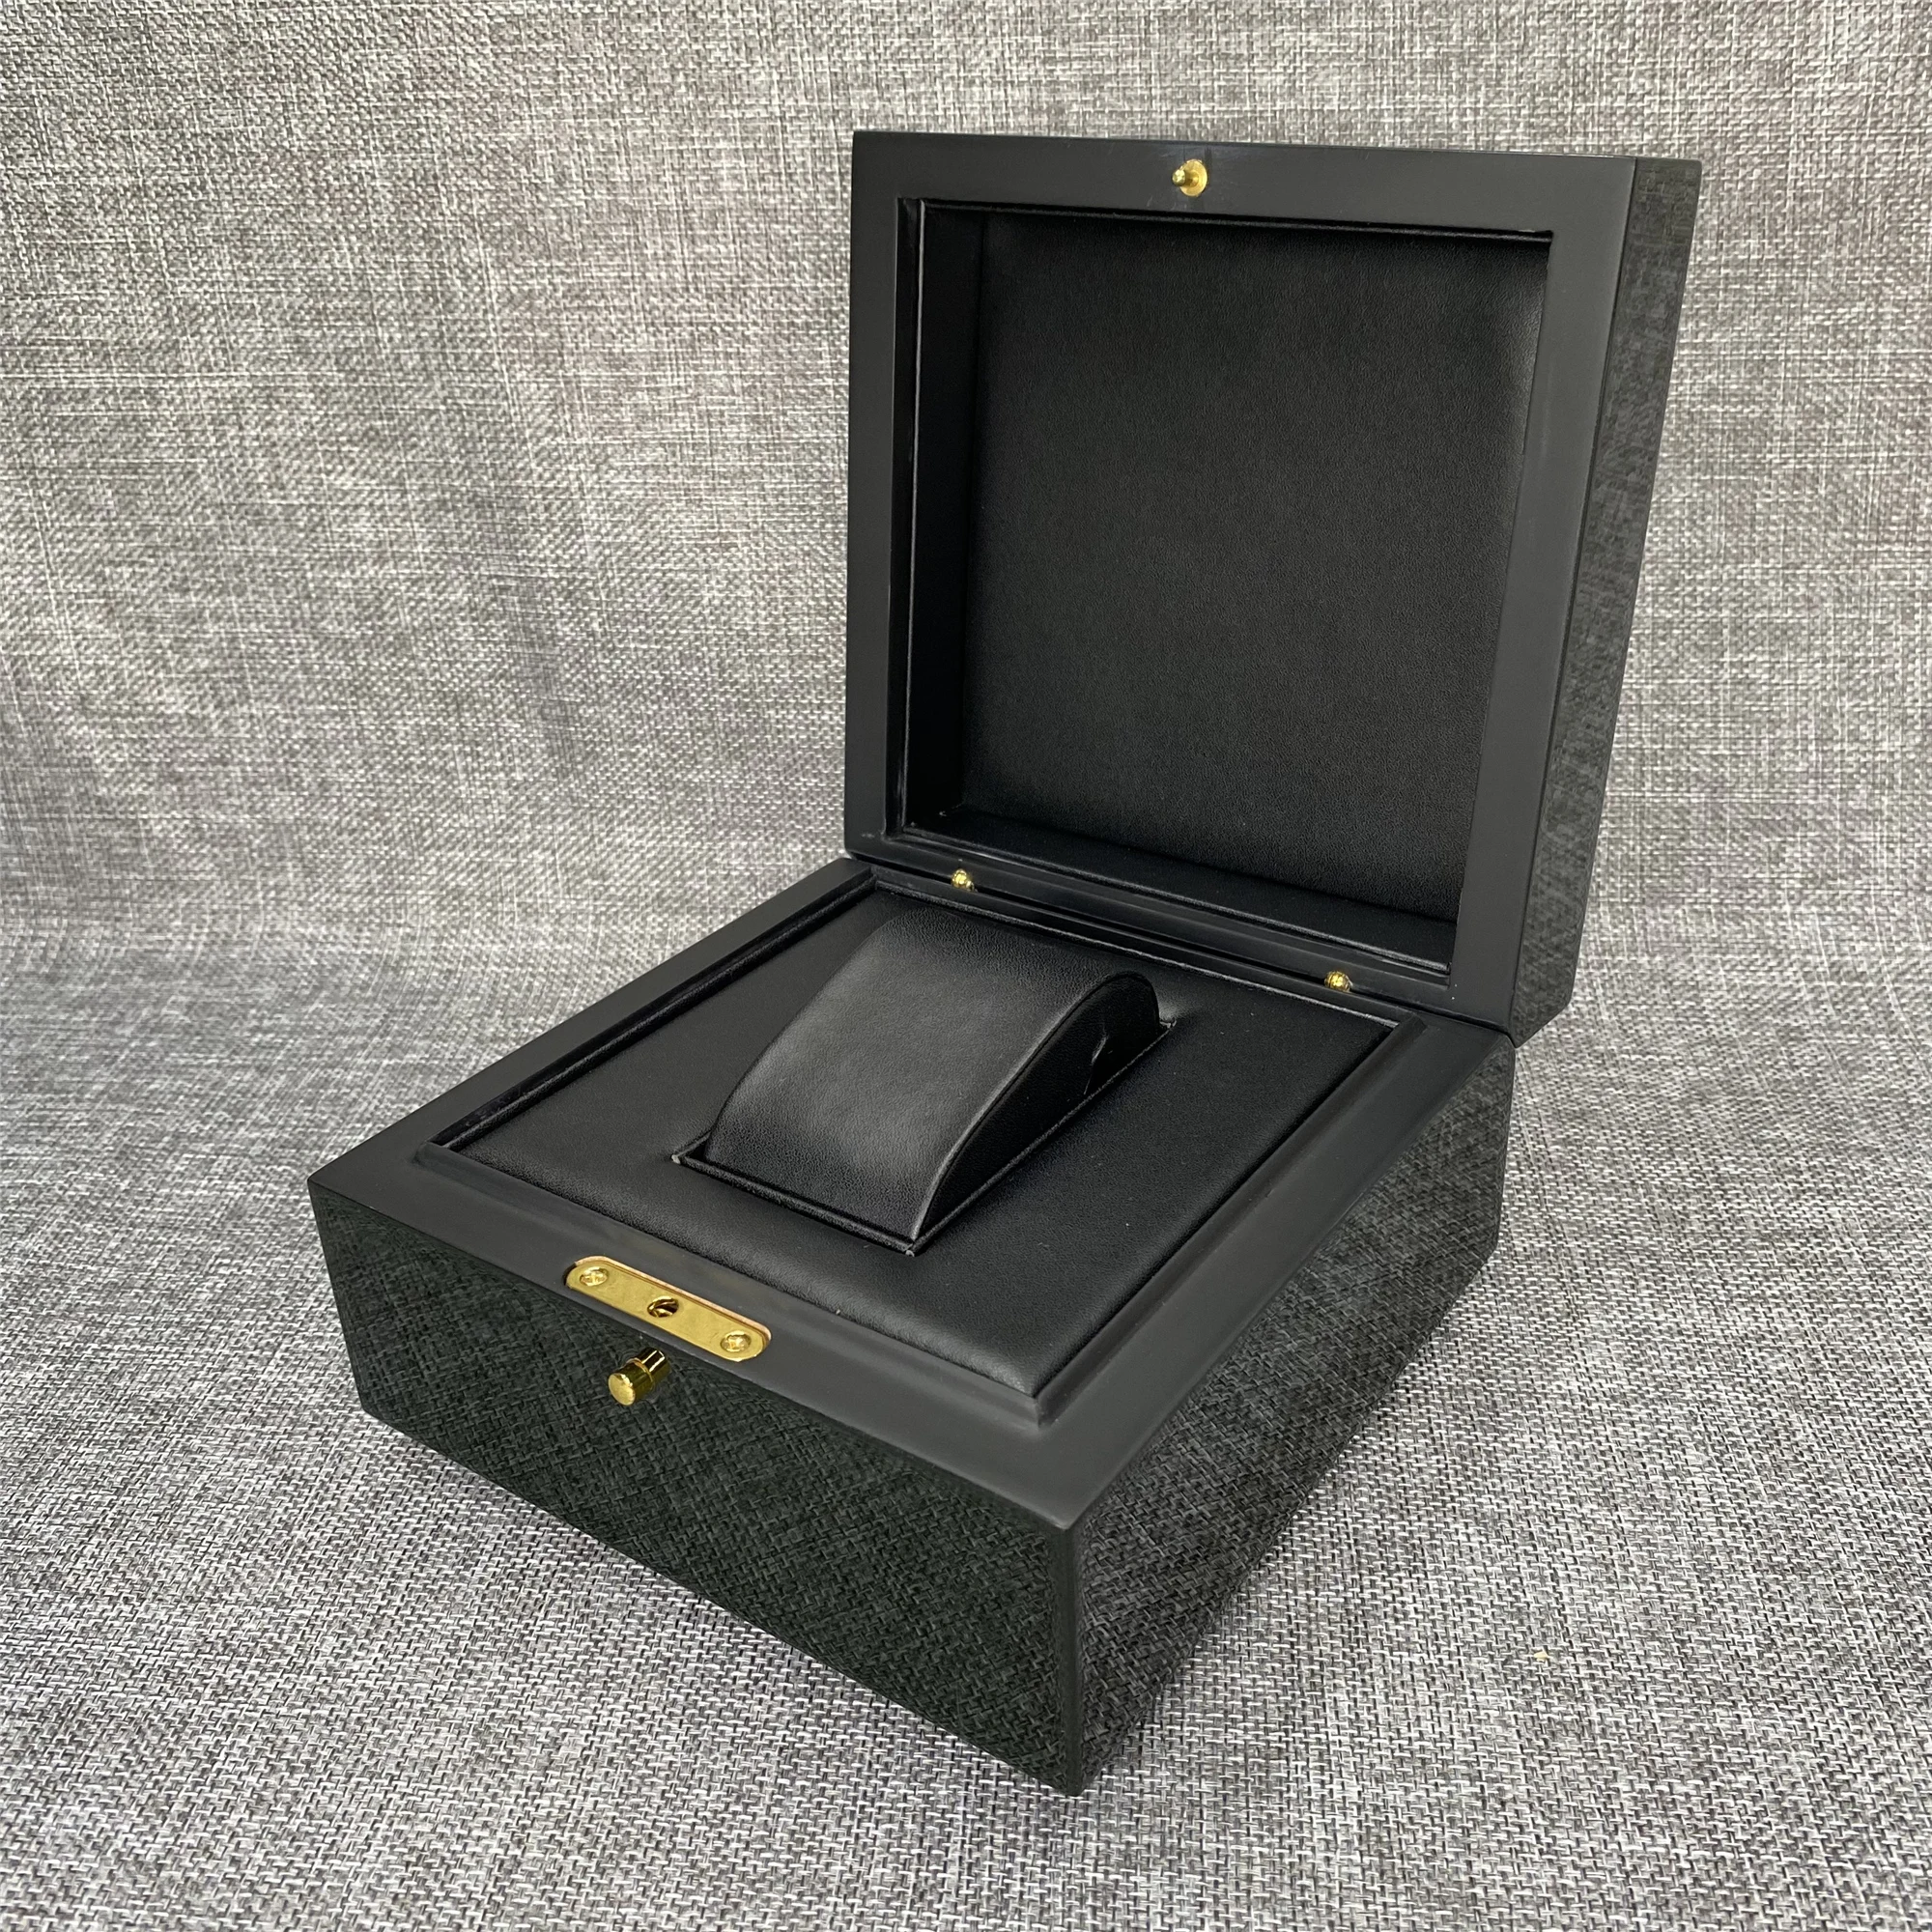 Green Watch Factory Supplier, New Luxury Gift Box With Brochure, AAA Watch Can Be Customized enlarge